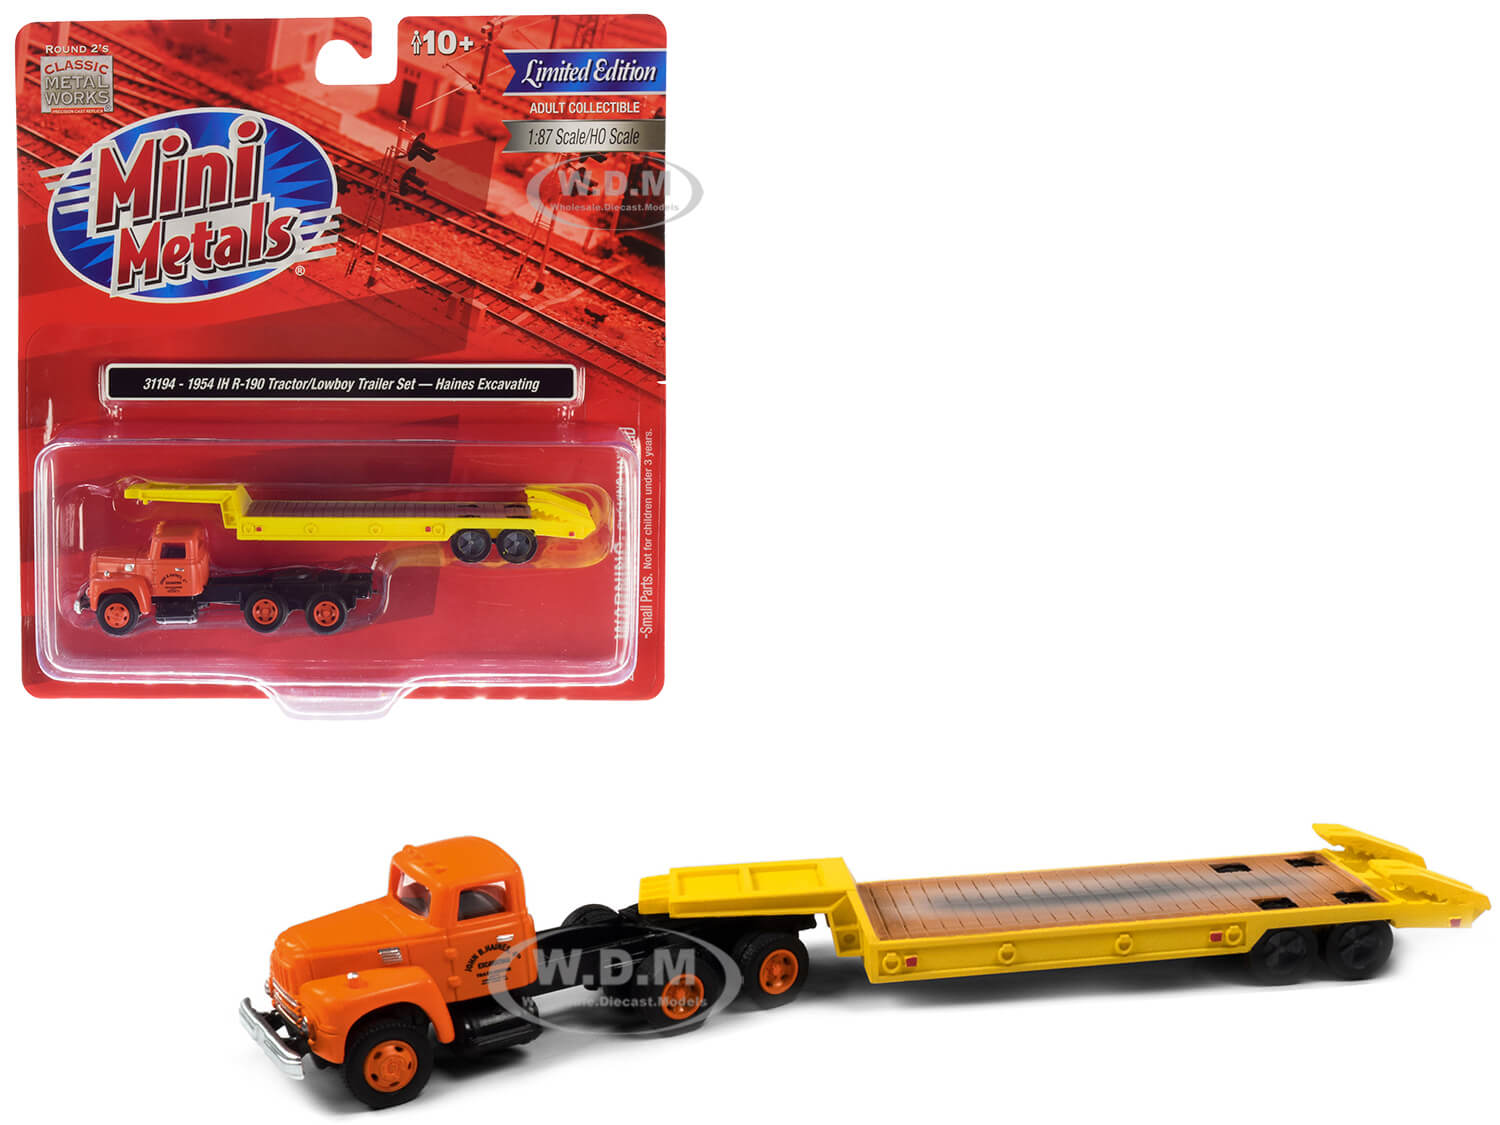 1954 Ih R-190 Tractor Truck With Lowboy Trailer "haines Excavating" Orange And Yellow 1/87 (ho) Scale Model By Classic Metal Works